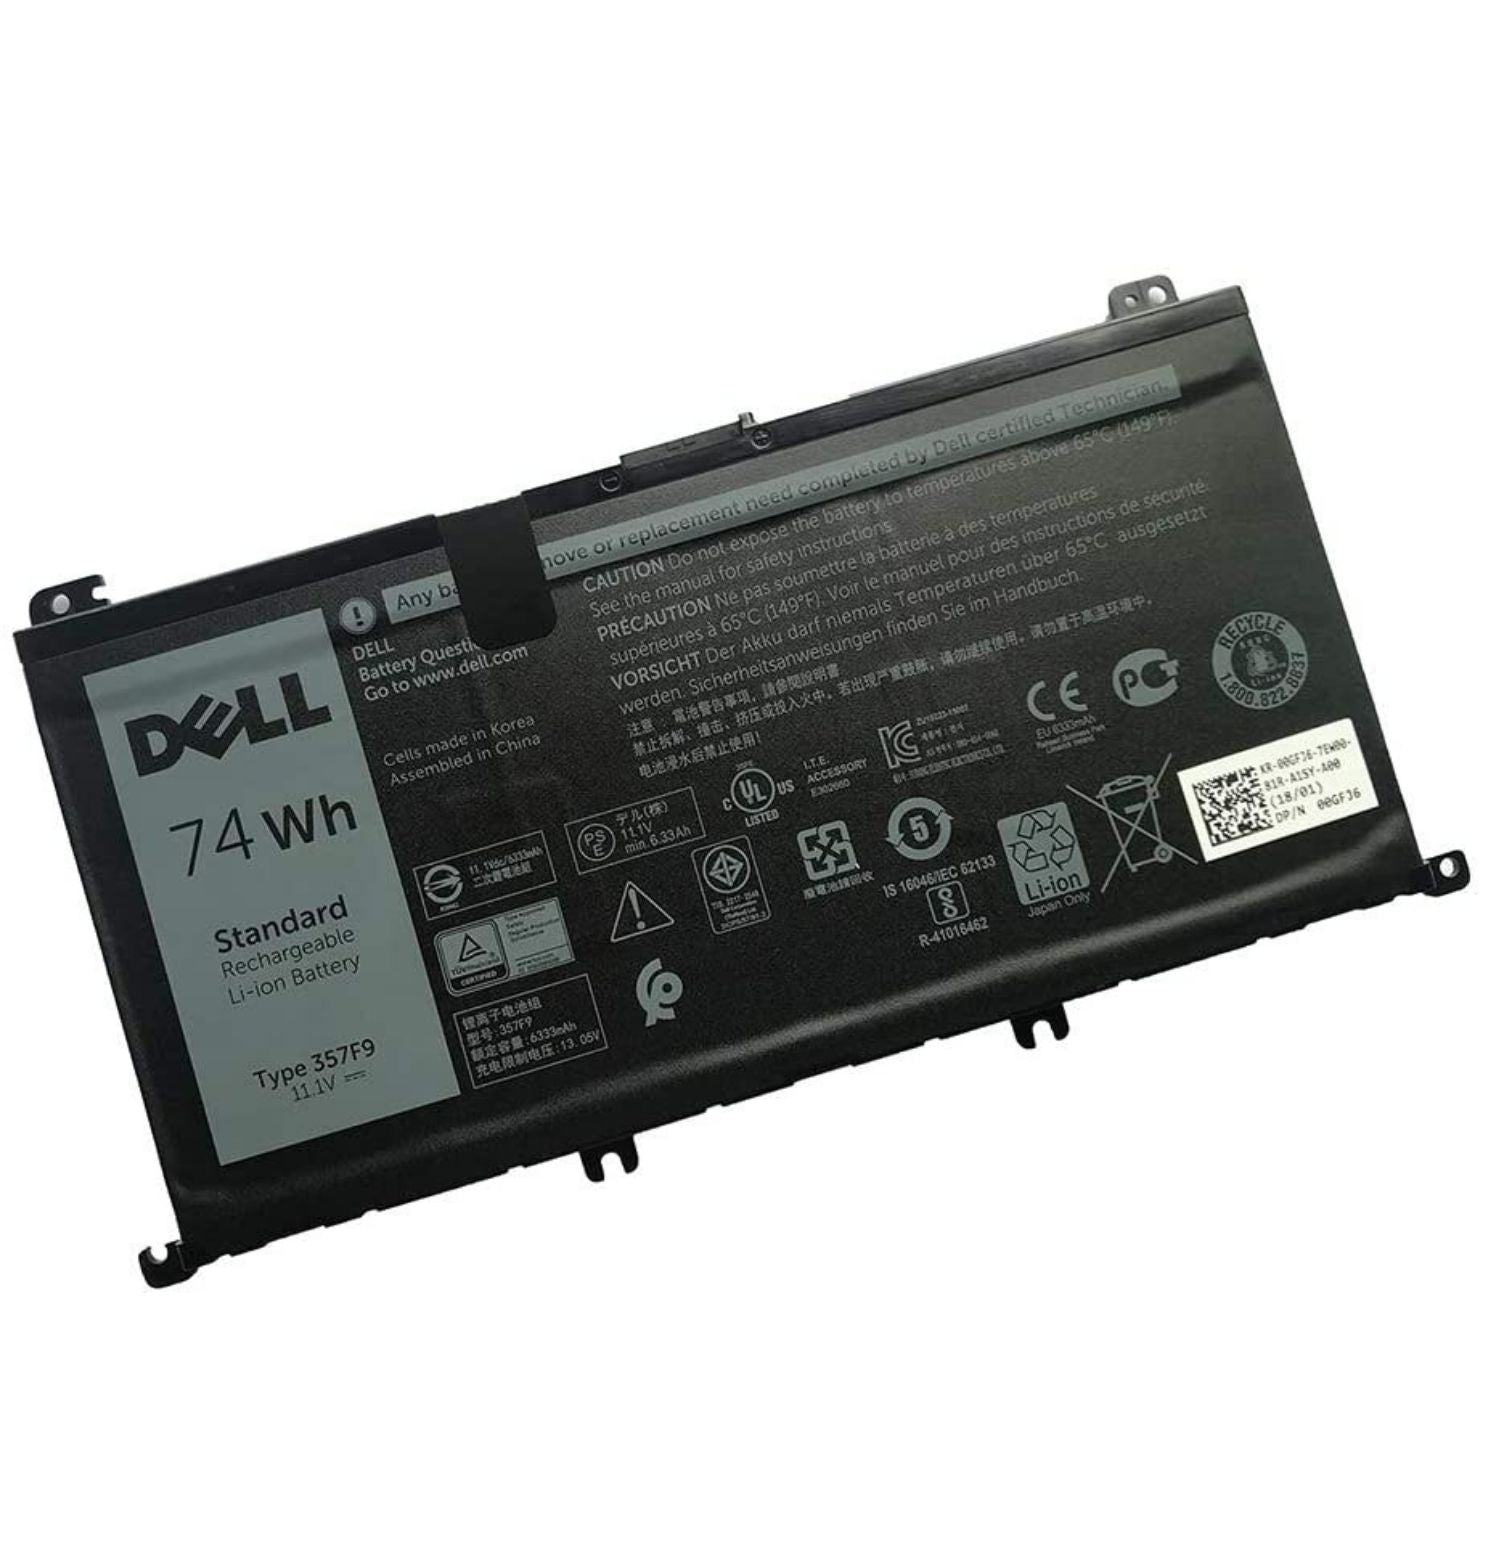 Dell 071JF4  Laptop Battery for latitude  15 7566 7567 7557 5576 5577 71JF4 357F9 Series Laptop.s